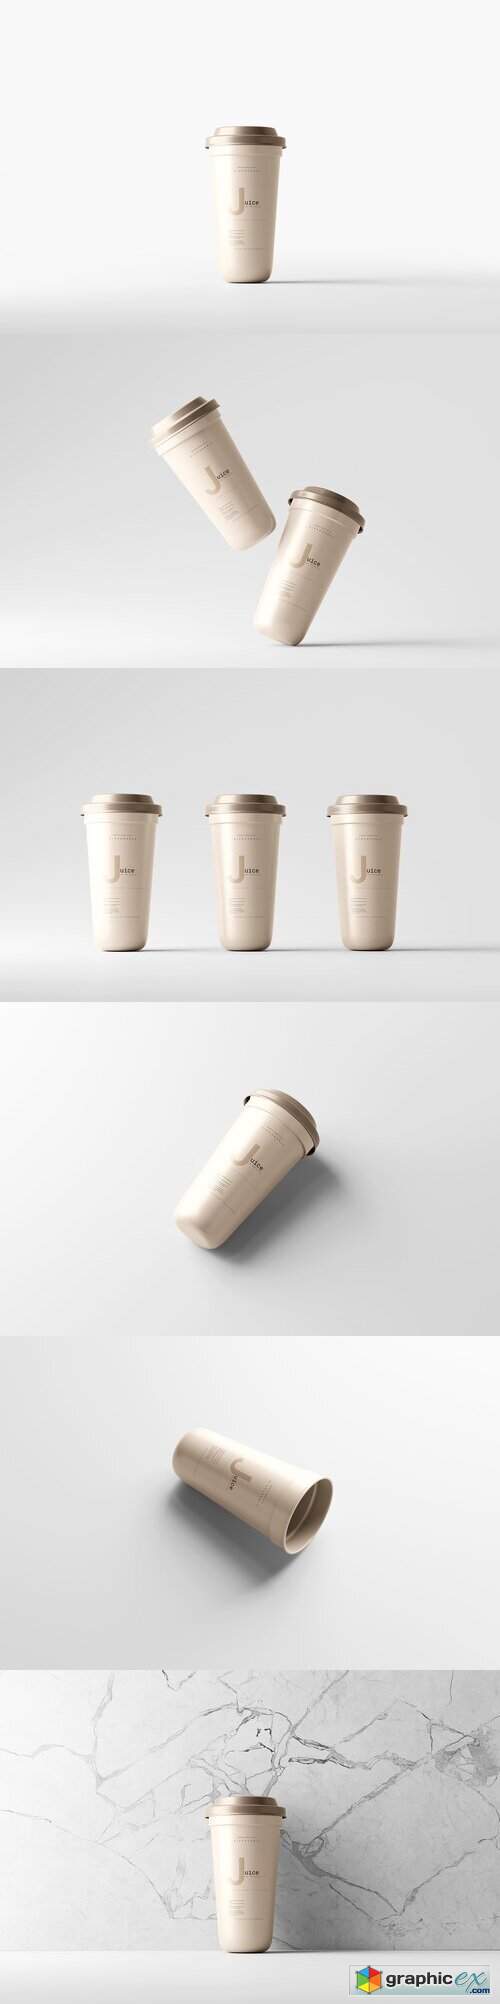  Disposable Plastic Cup Mockup 